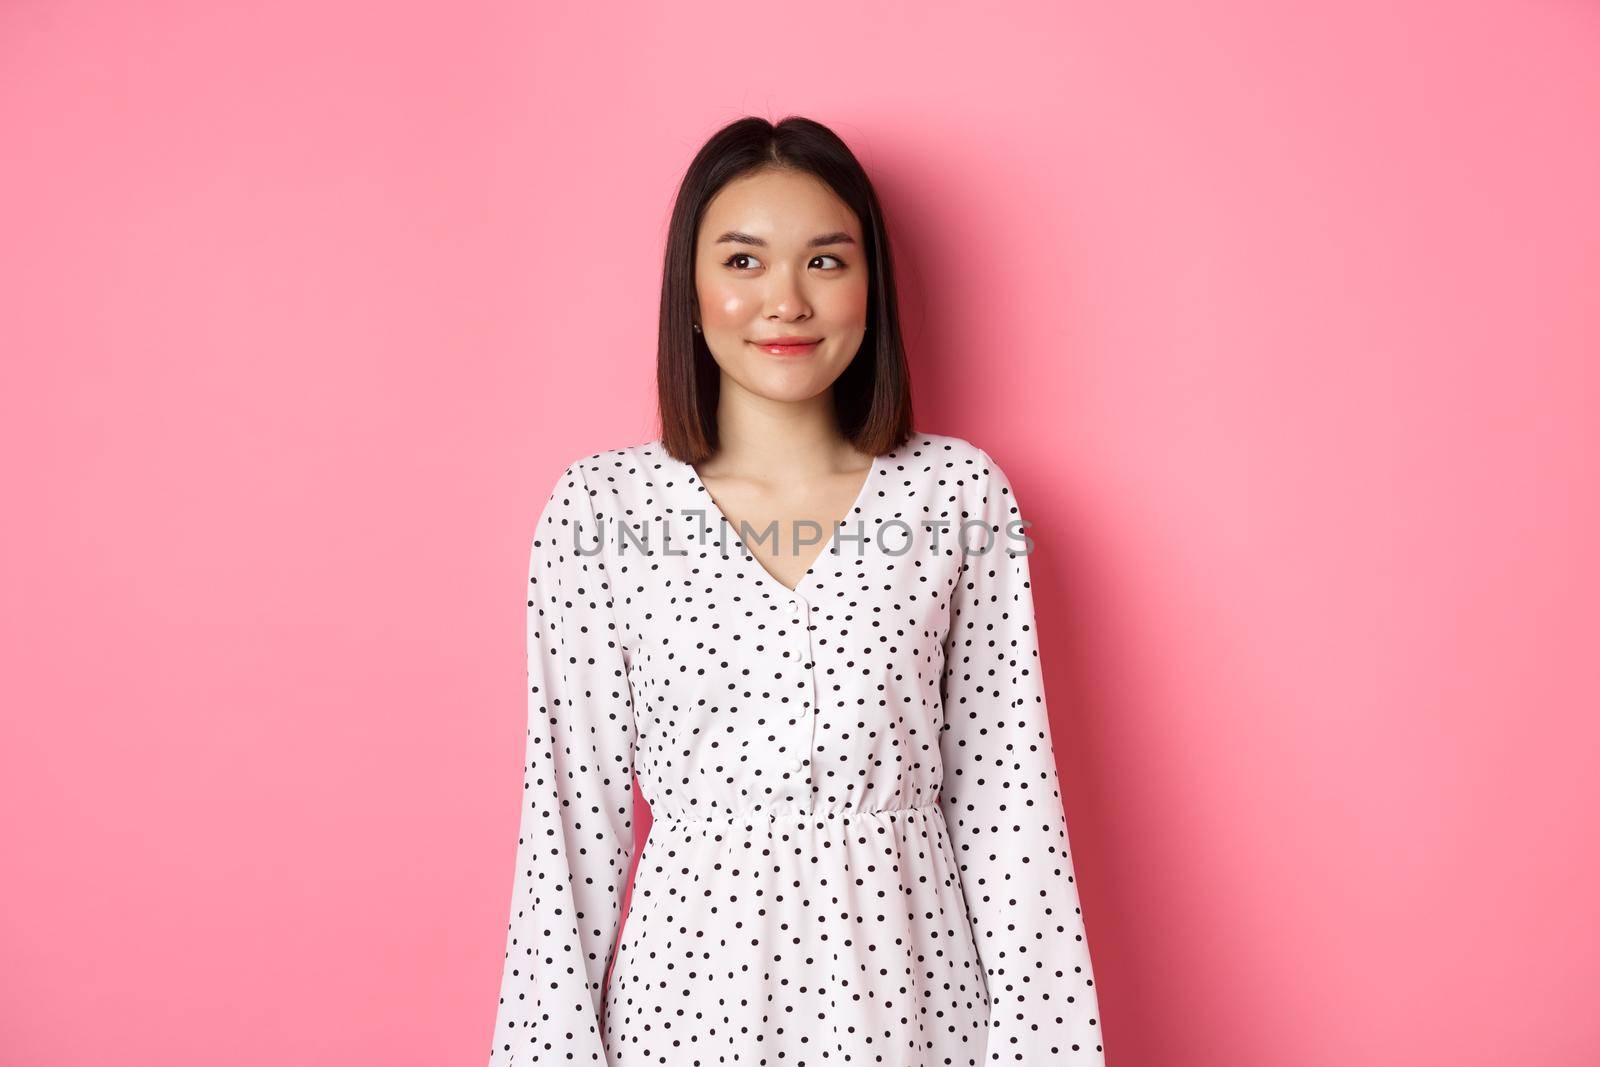 Cute asian woman smiling, looking left at copy space, standing on romantic pink background.